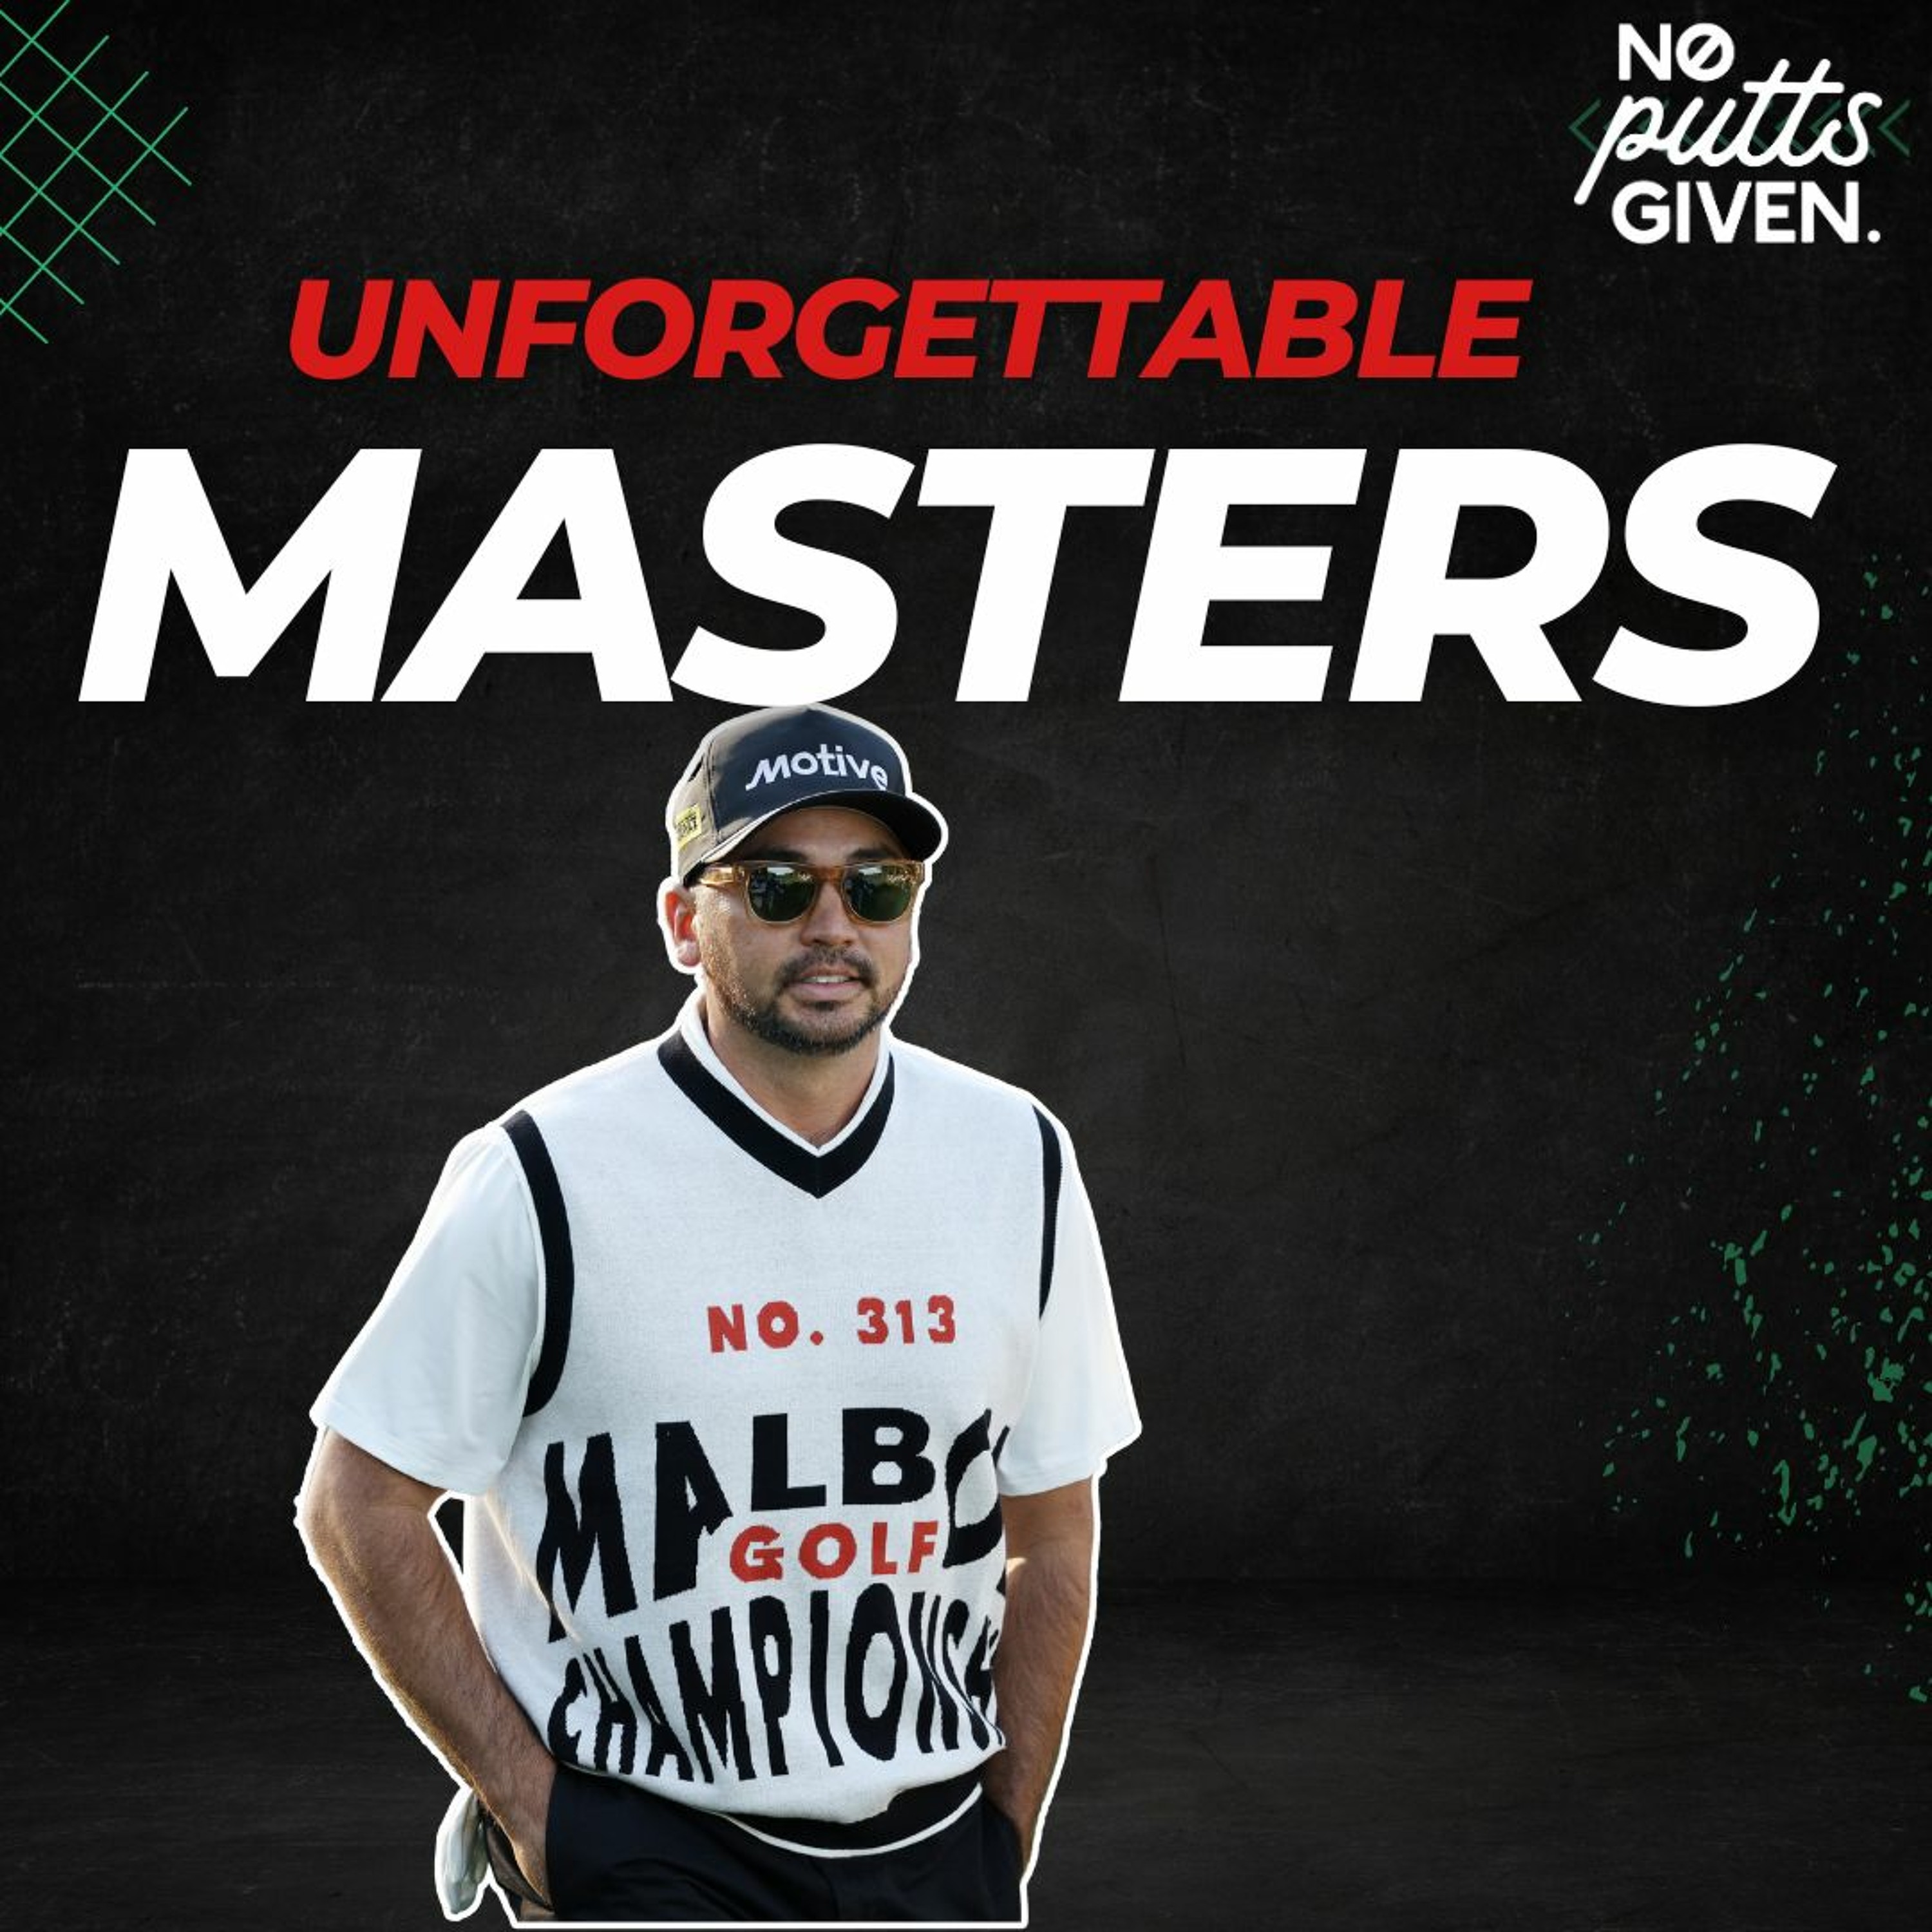 The Good, Bad & The Ugly of The Masters | No Putts Given 181